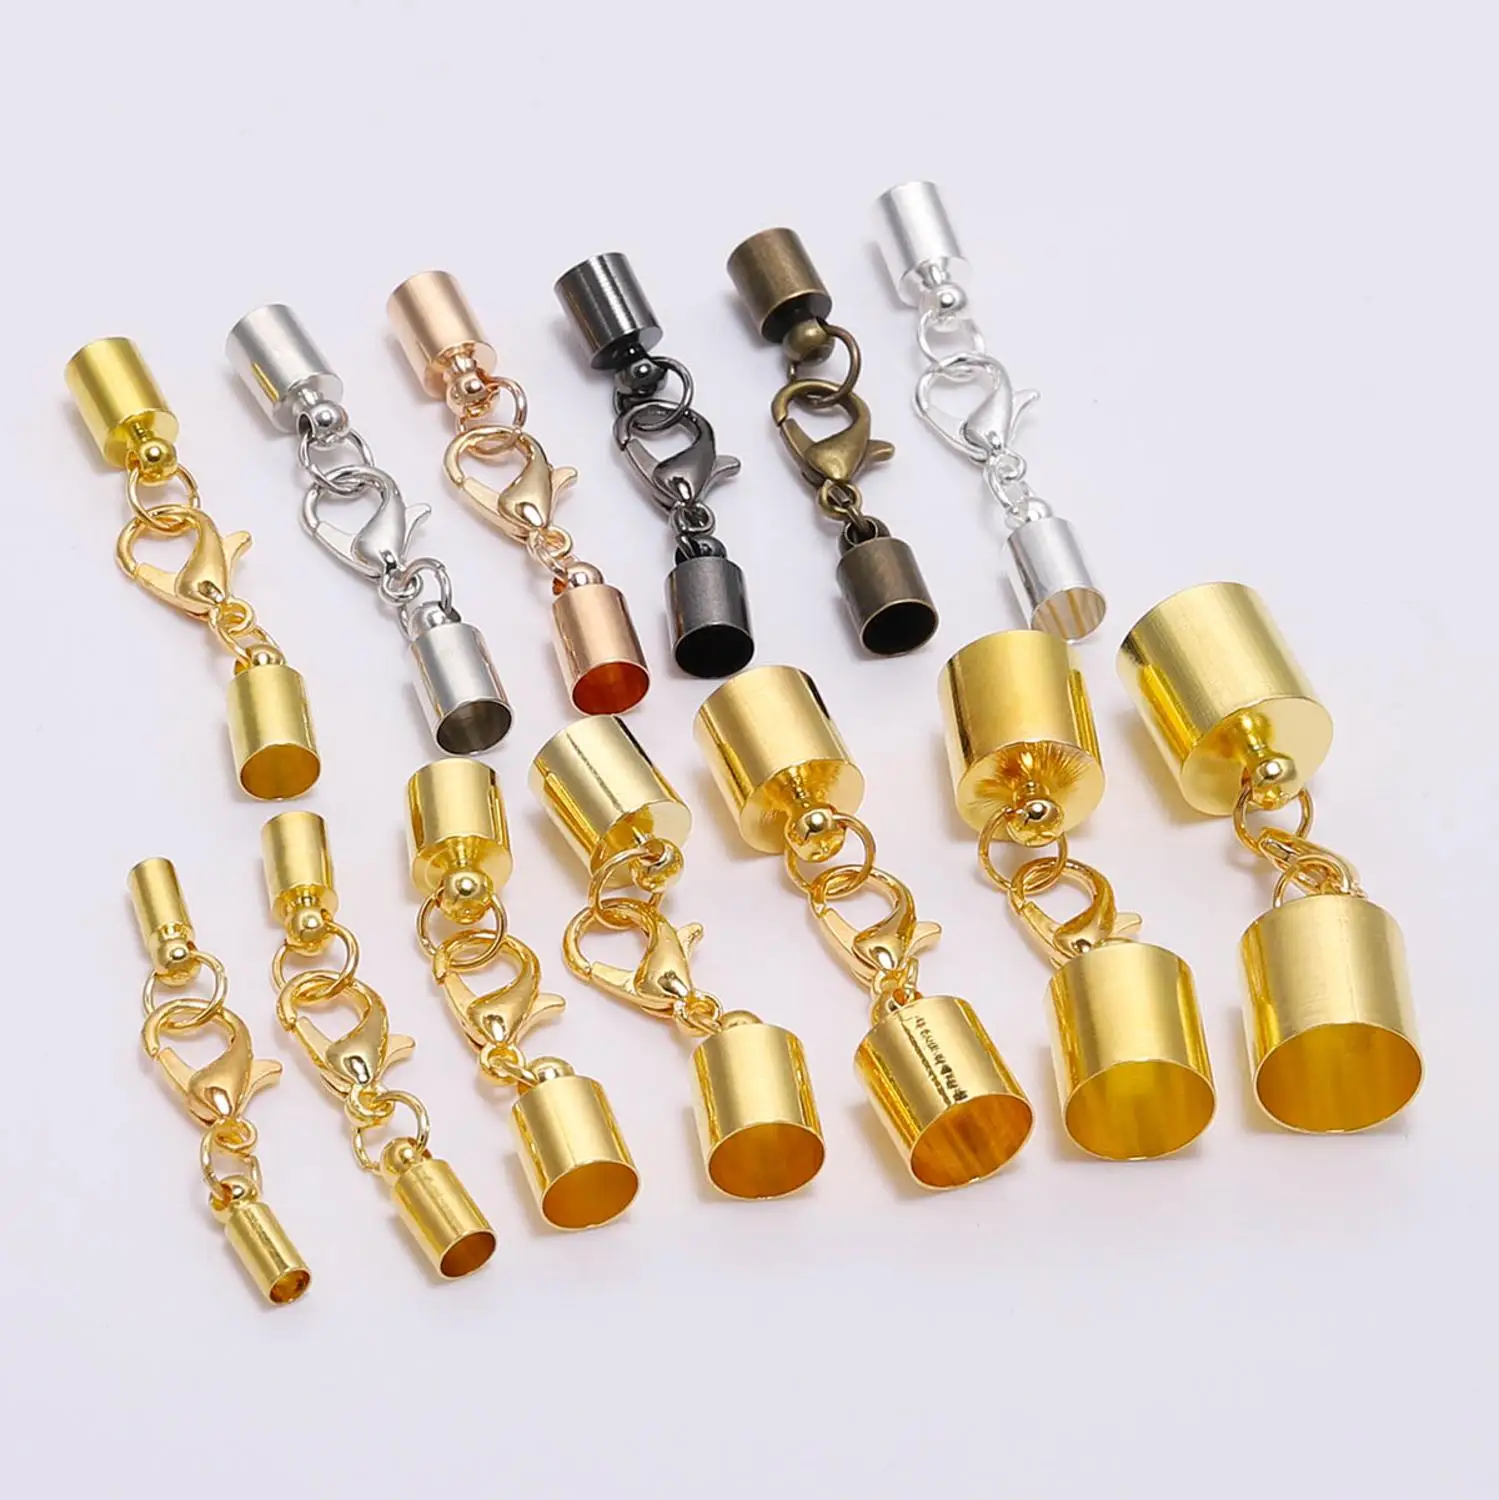 

10pcs/lot Tassel Caps Leather Cord End Crimp Bead Lobster Clasps Connectors For DIY Necklace Jewelry Making Findings Accessories